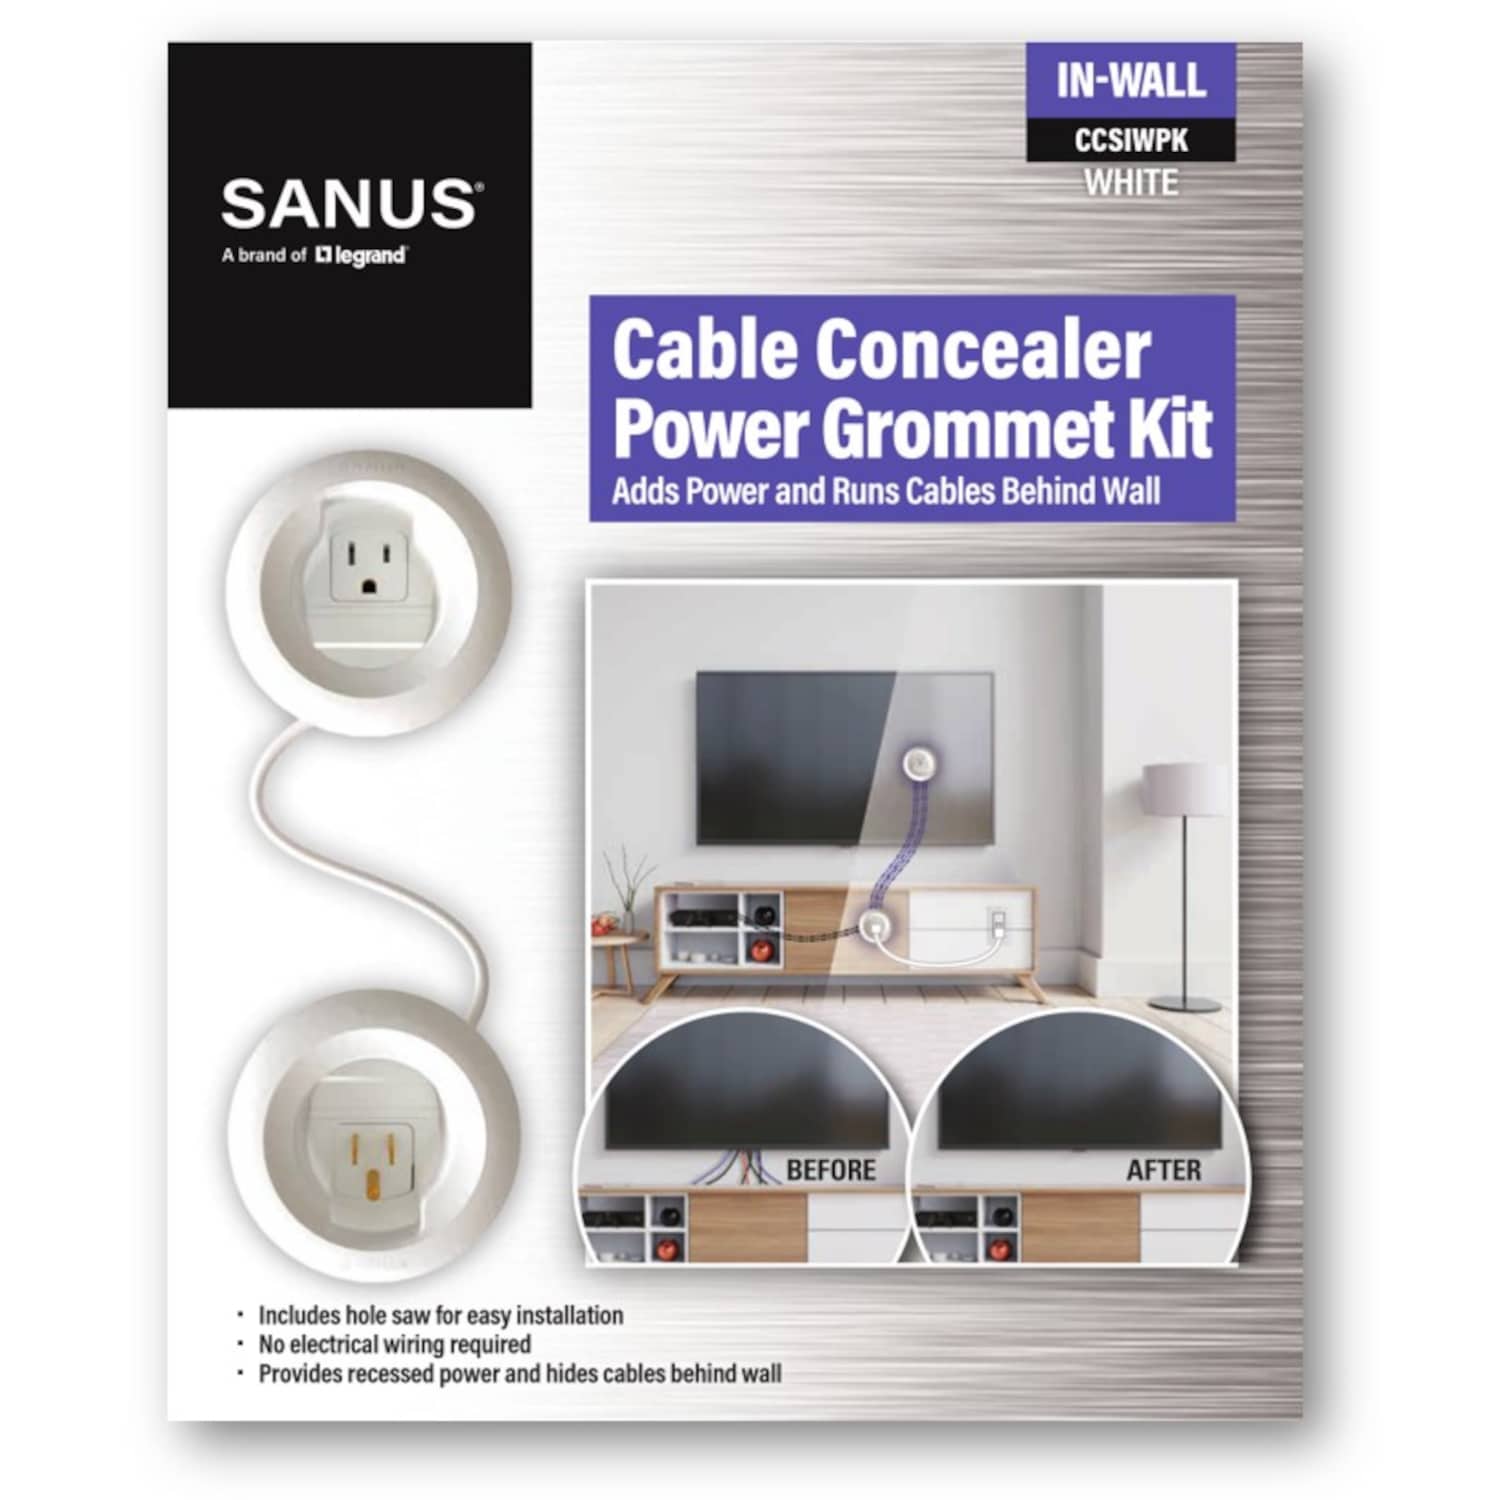 Sanus On-Wall Cable Concealer Cord Cover Kit for Mounted TVs Holds